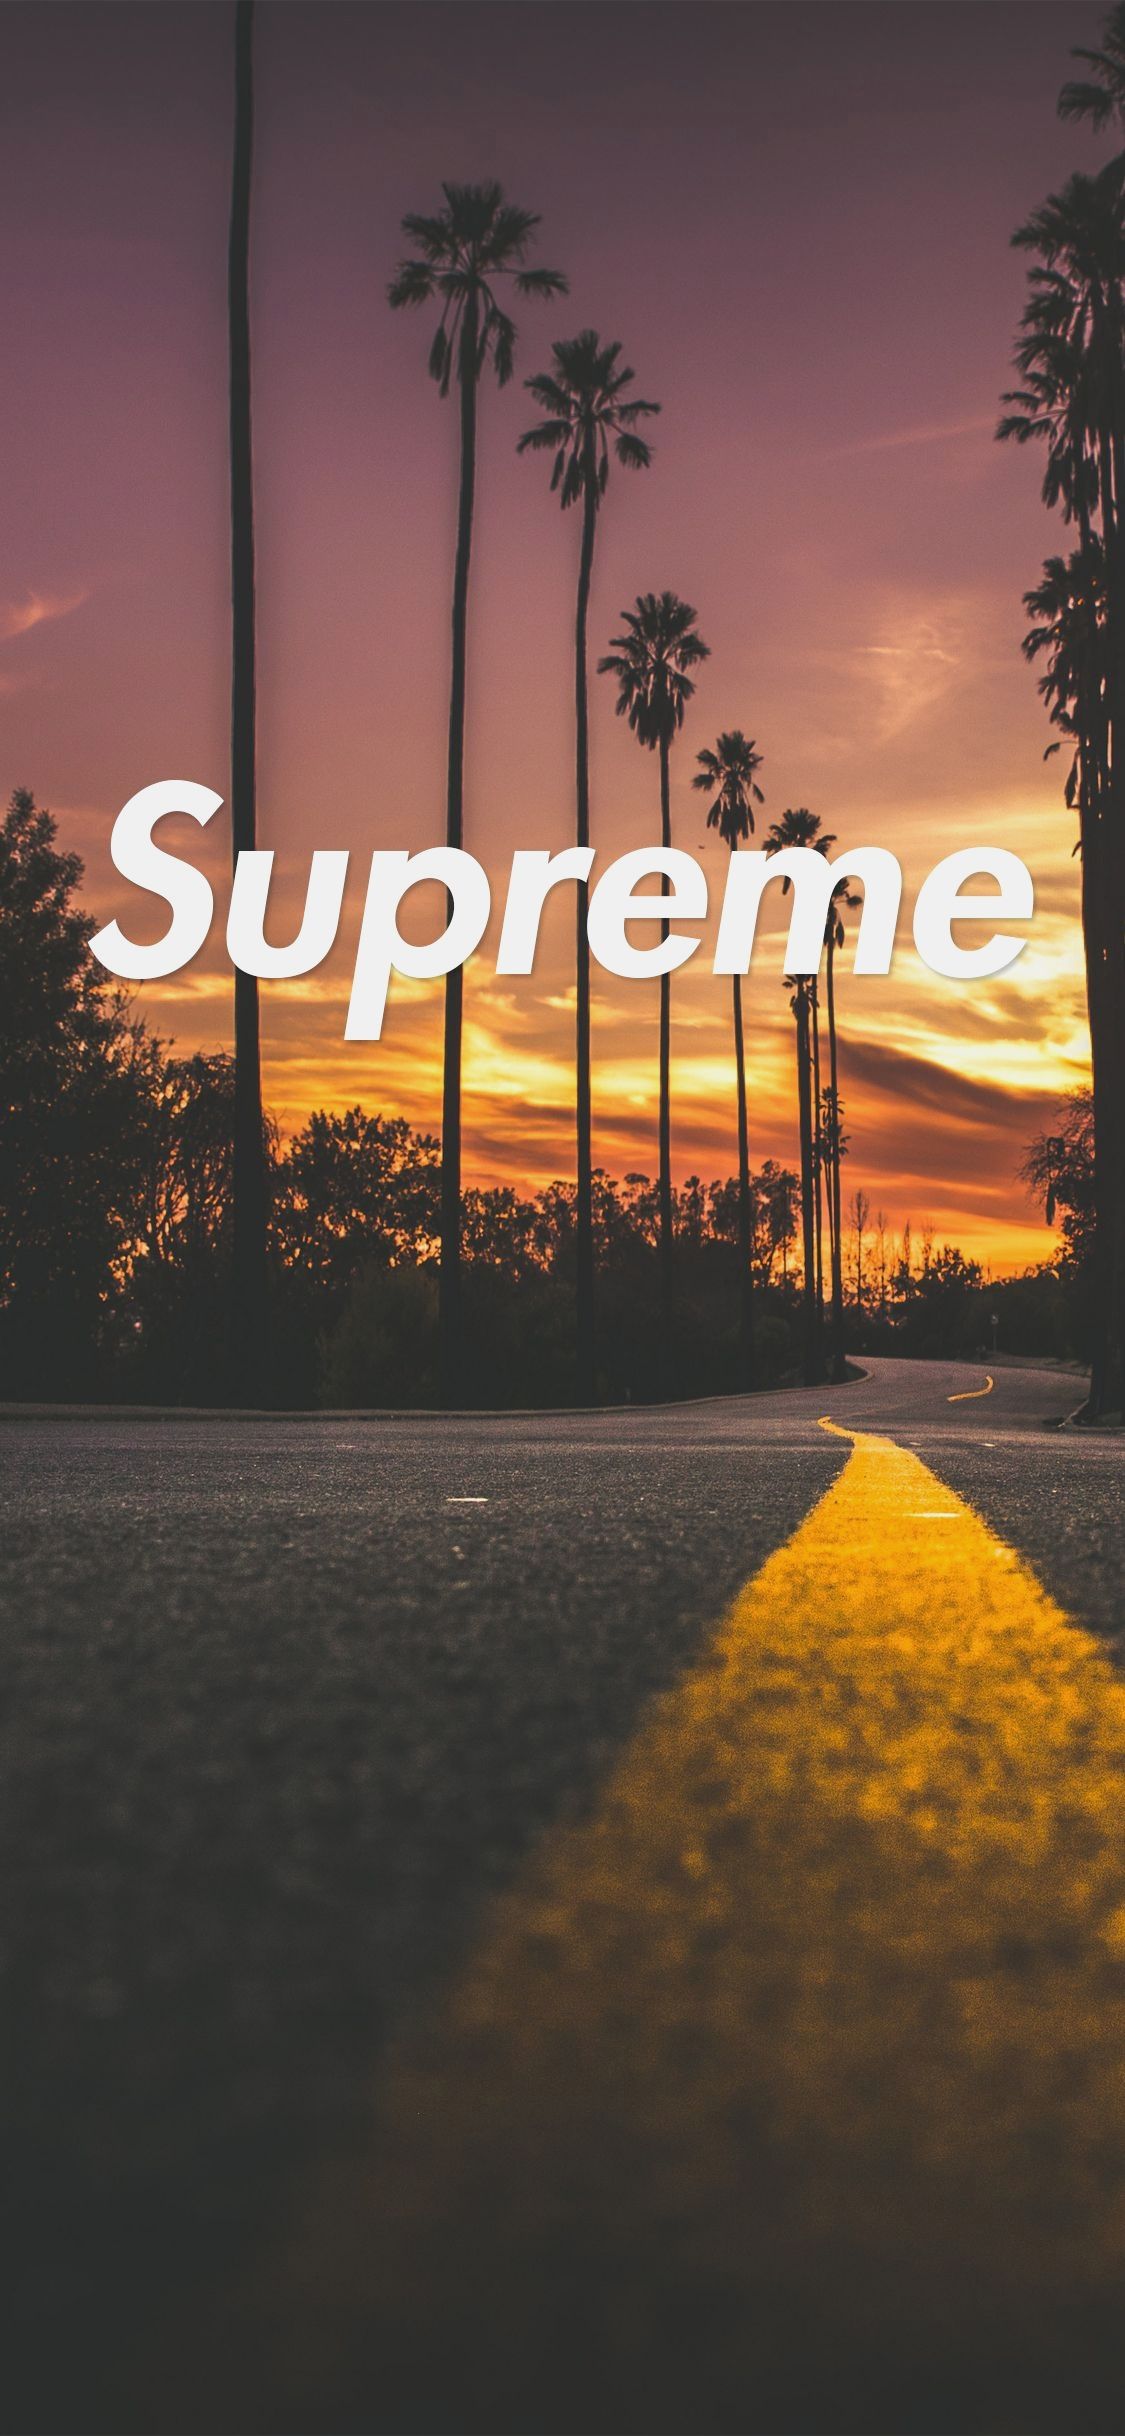 Free download Supreme Cool Wallpapers Iphone Cute Cool For